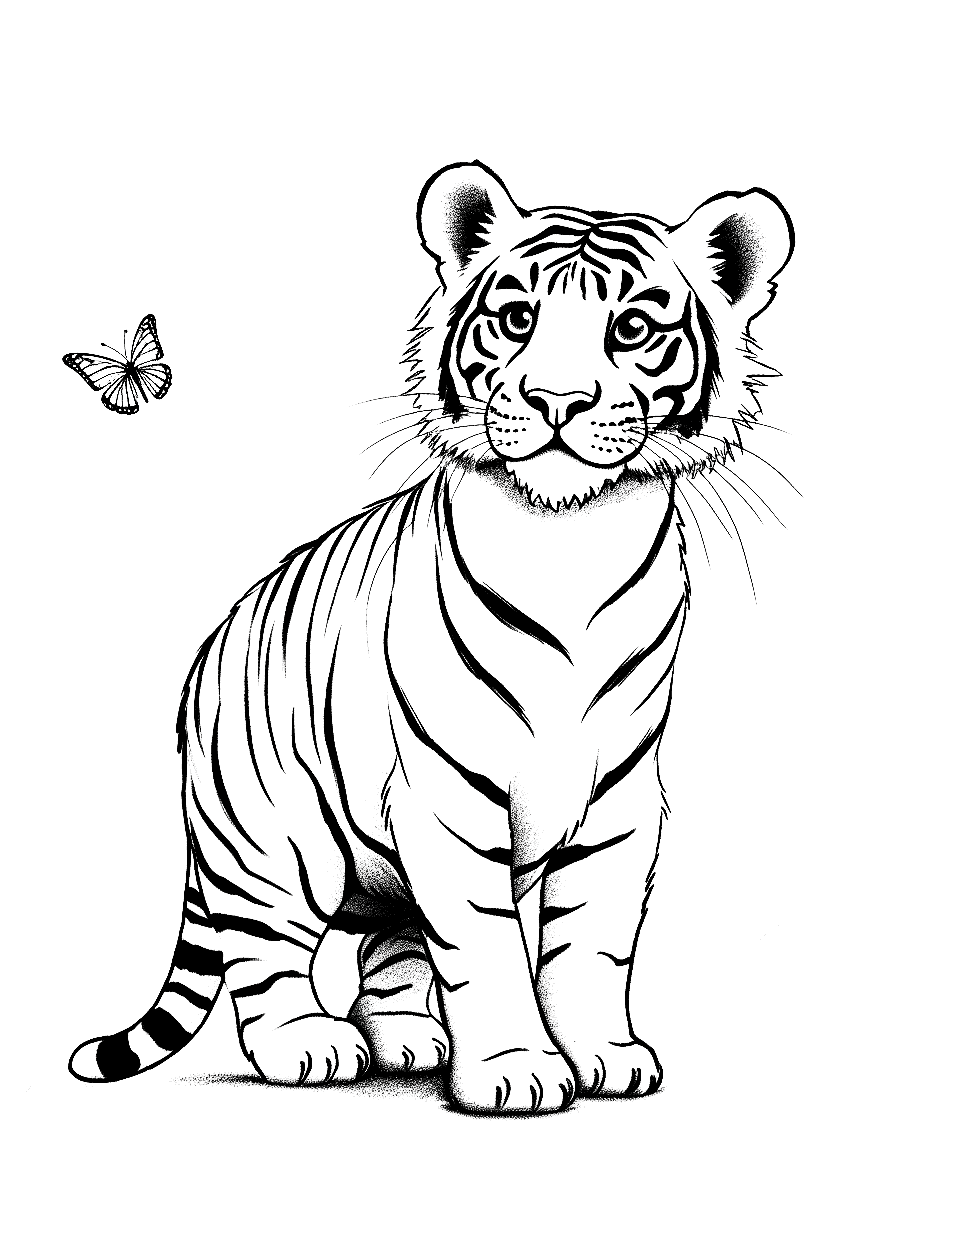 Tiger Cub Coloring Page - A tiger cub curiously looking at a butterfly.